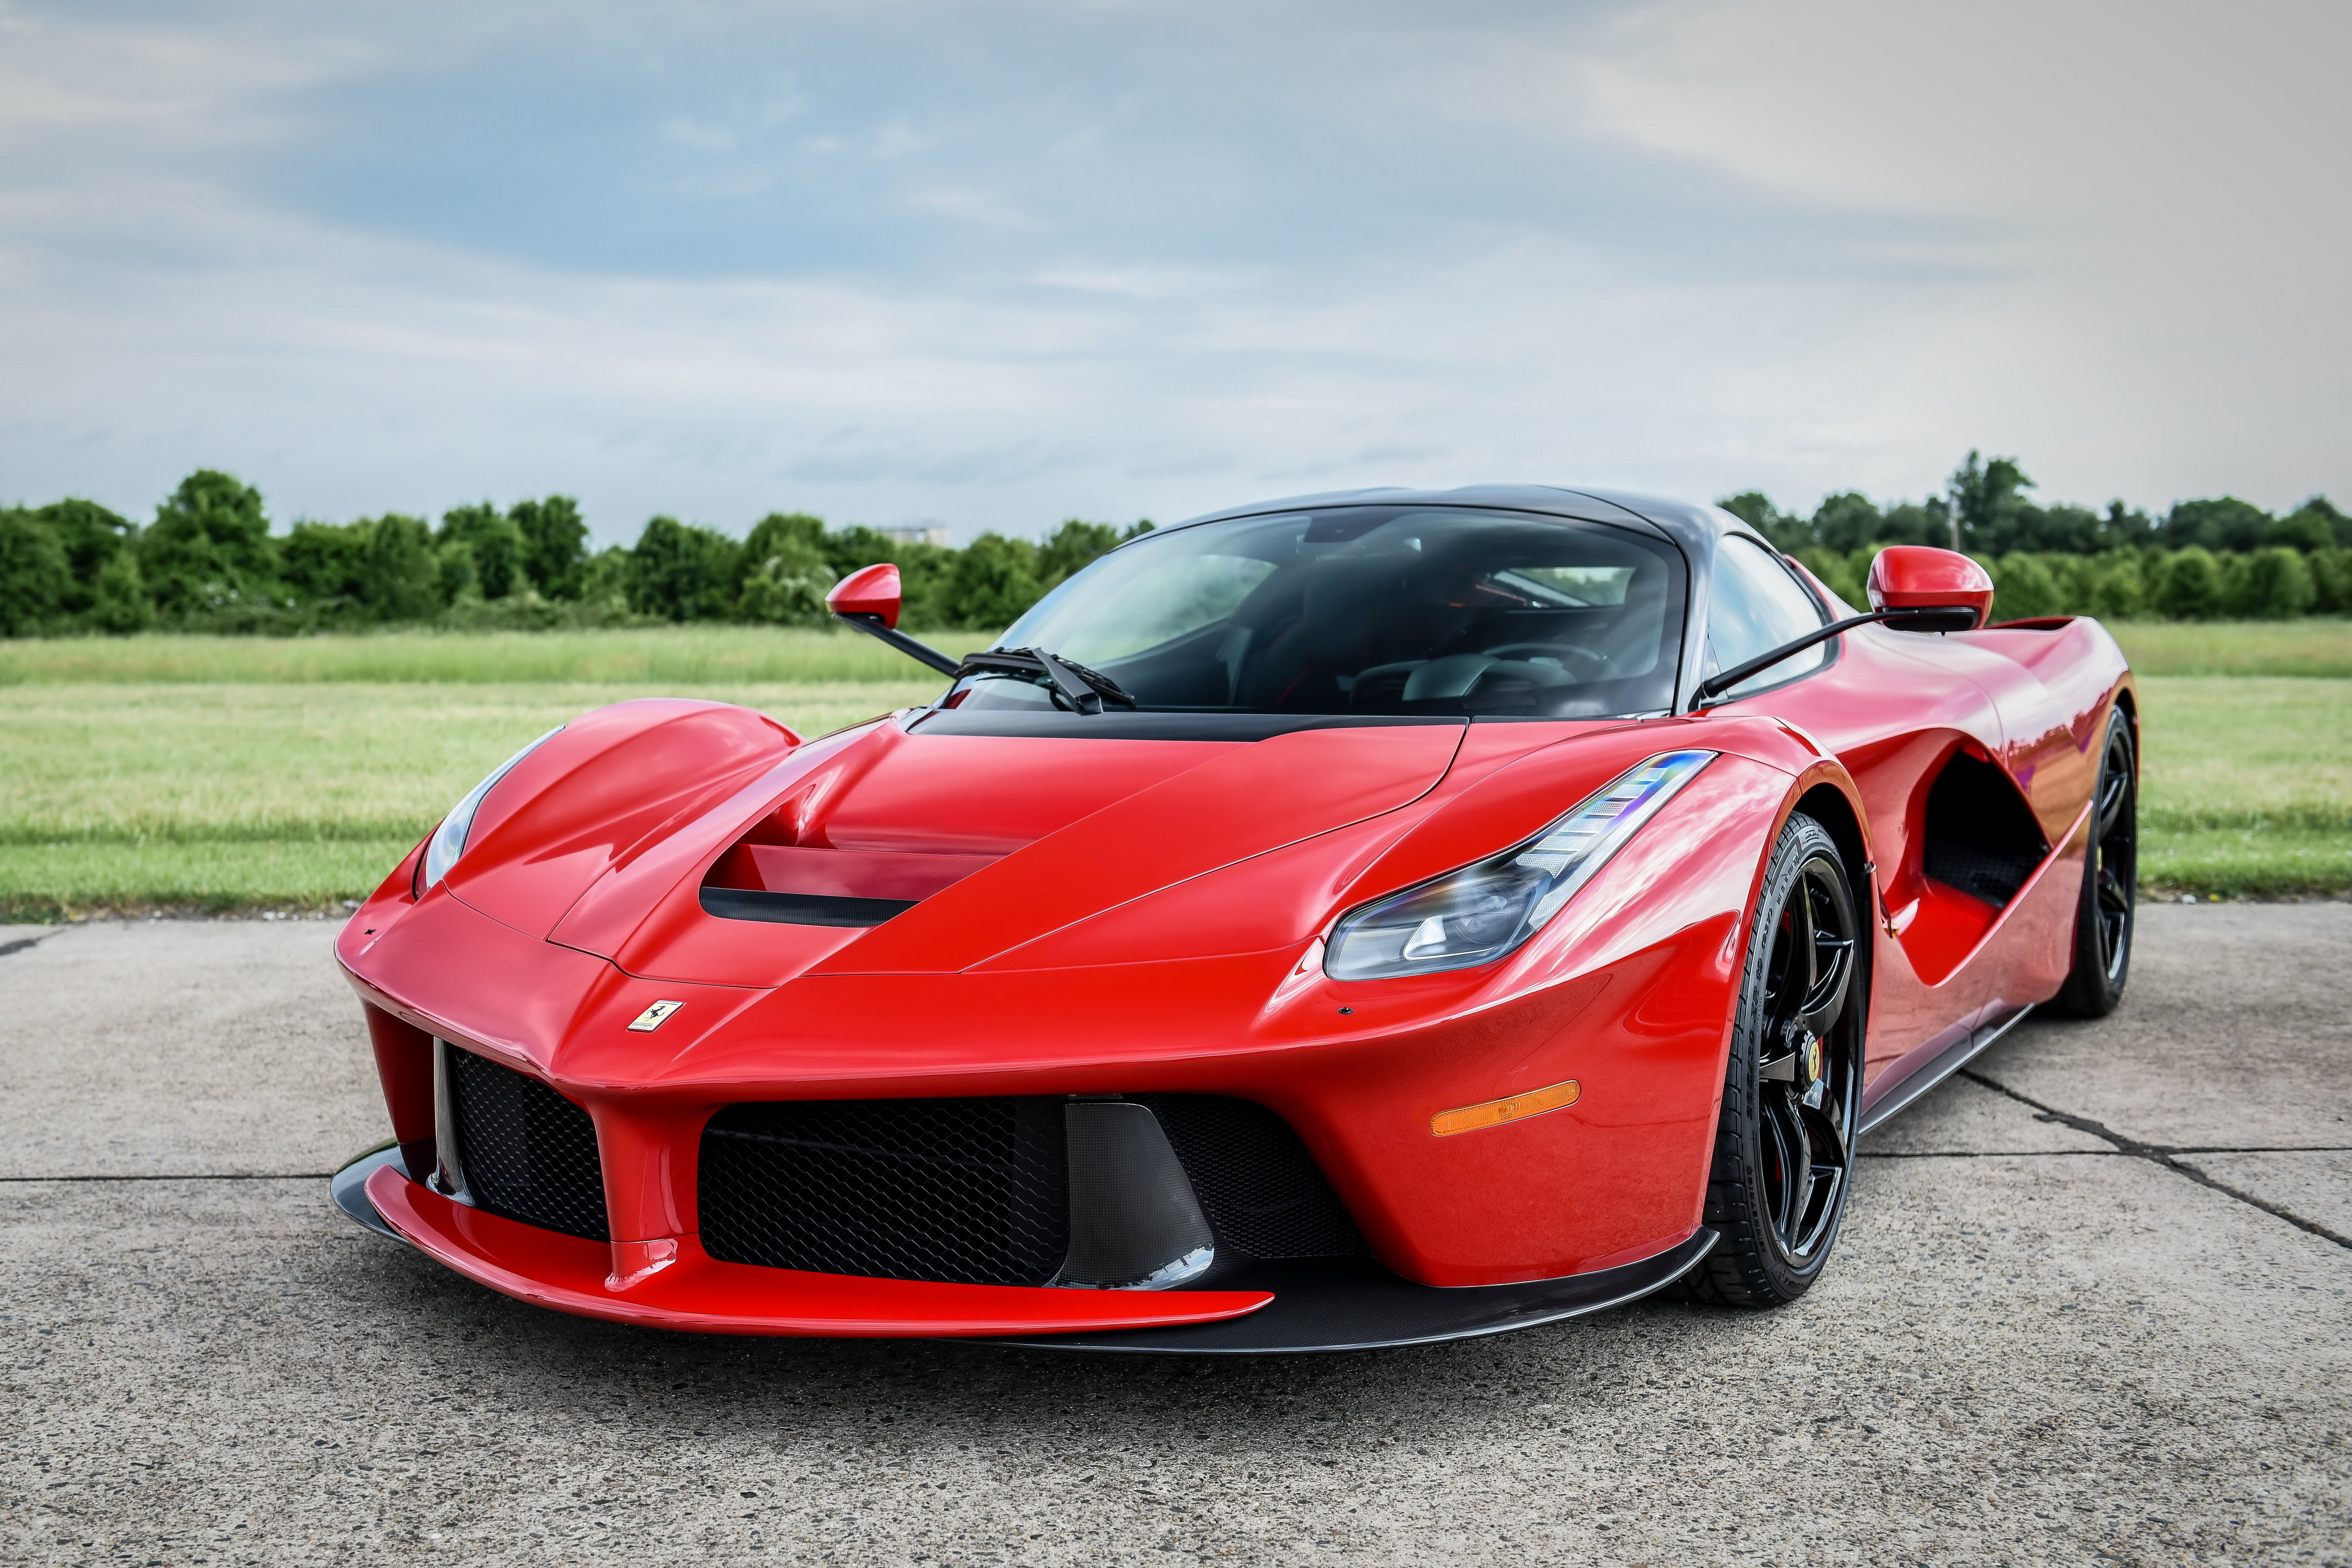 Ferrari wallpapers for desktop, download free Ferrari pictures and  backgrounds for PC 